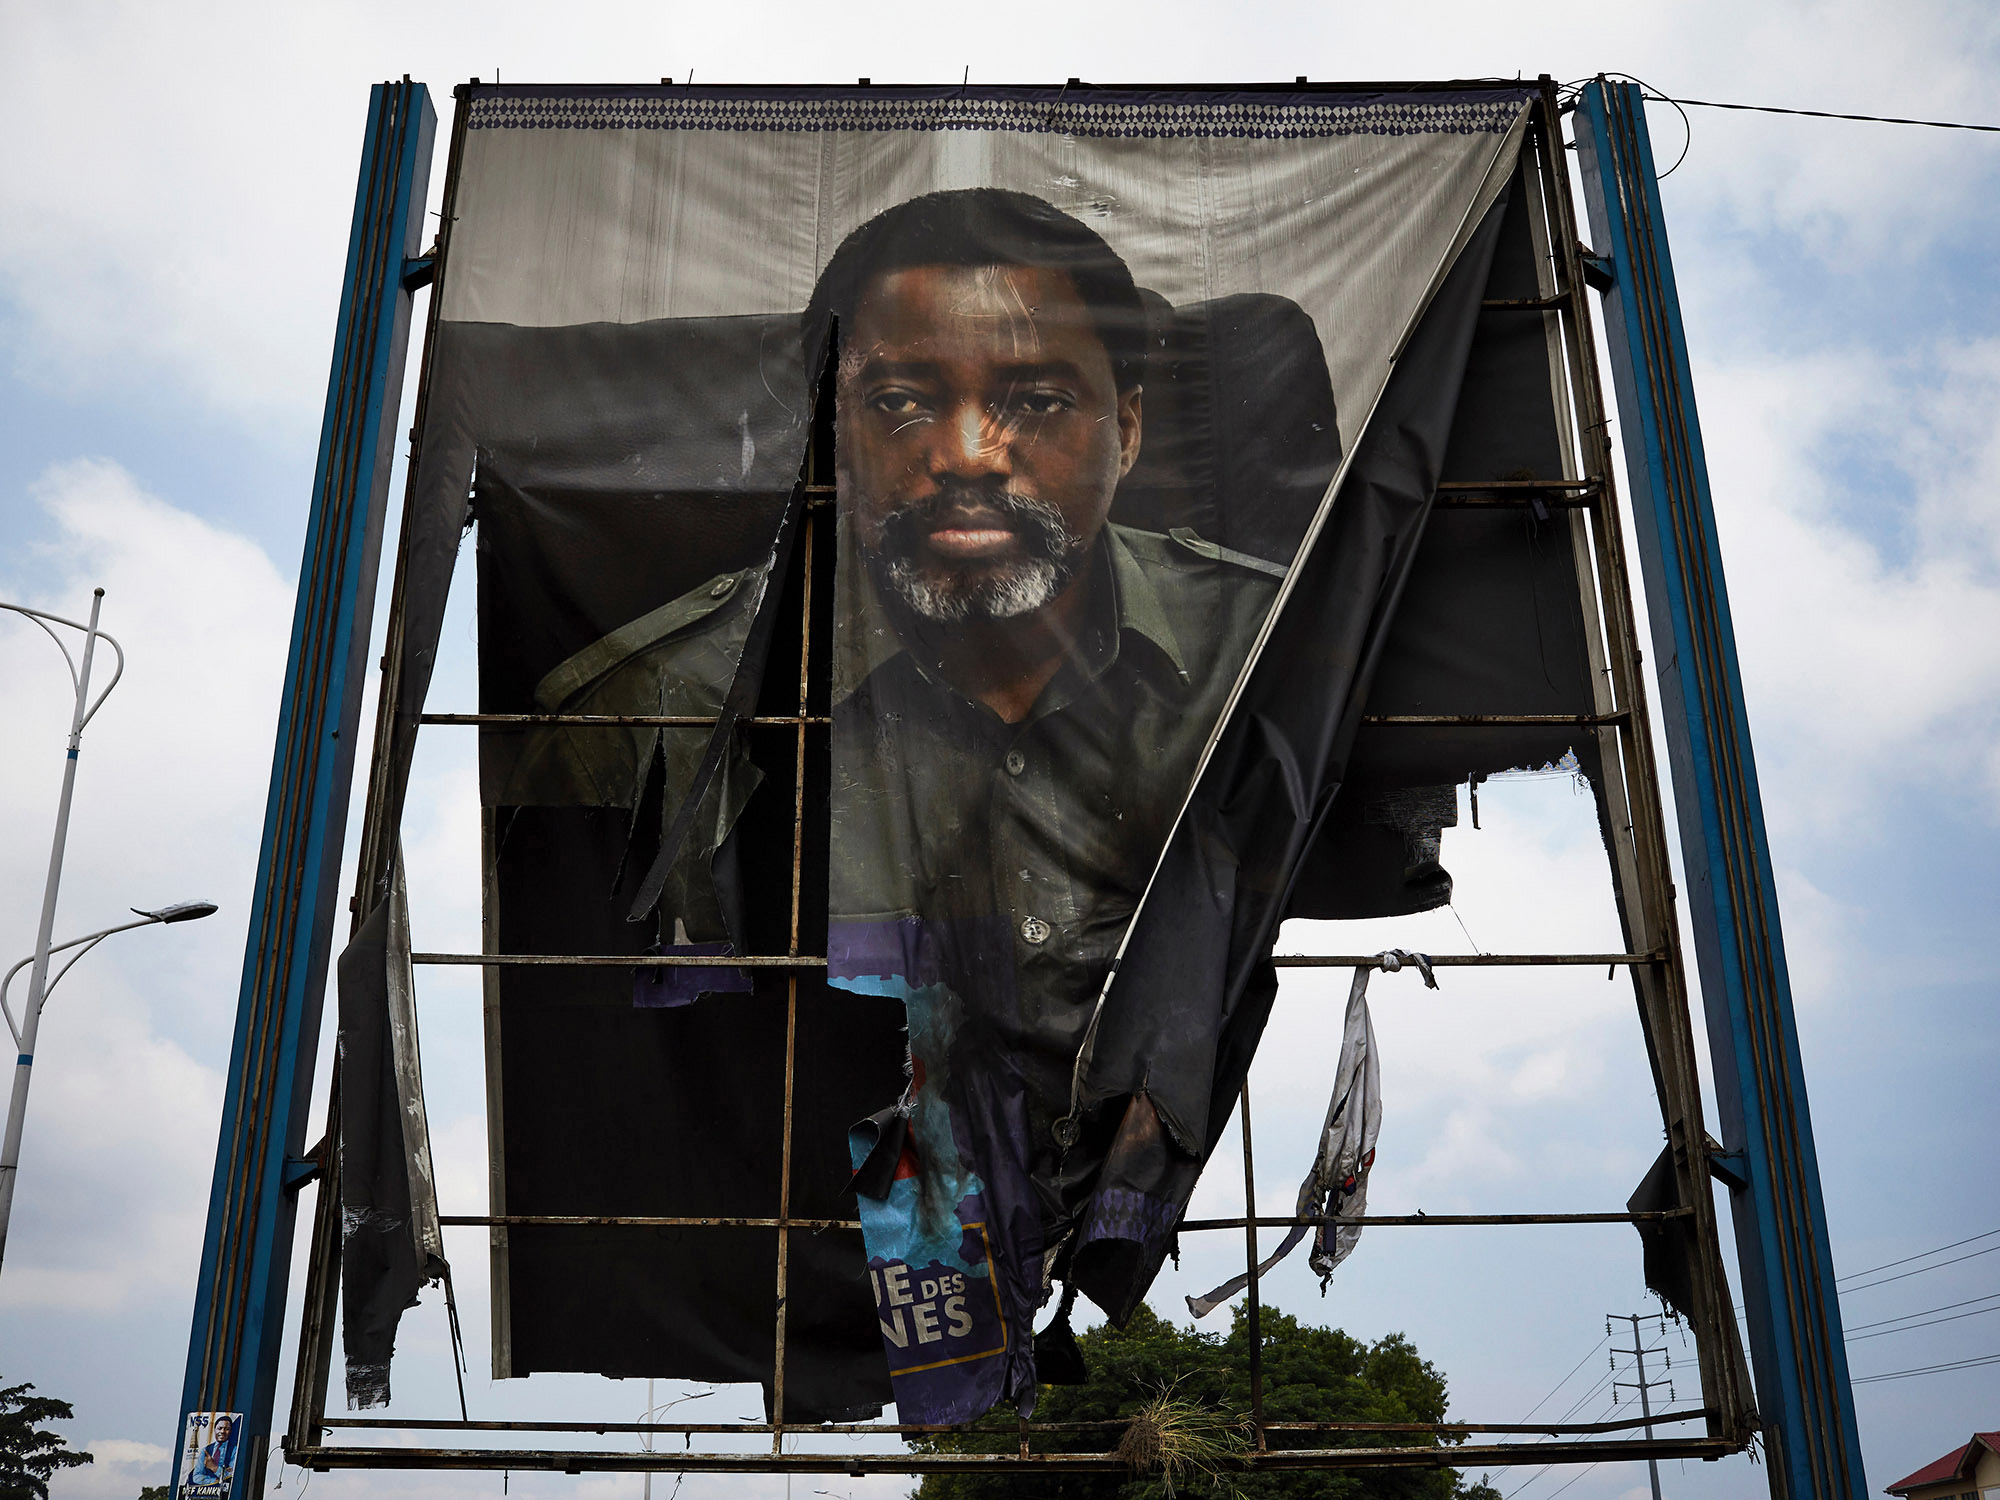 A burned billboard of Congo’s then outgoing President Joseph Kabila in January 2019.